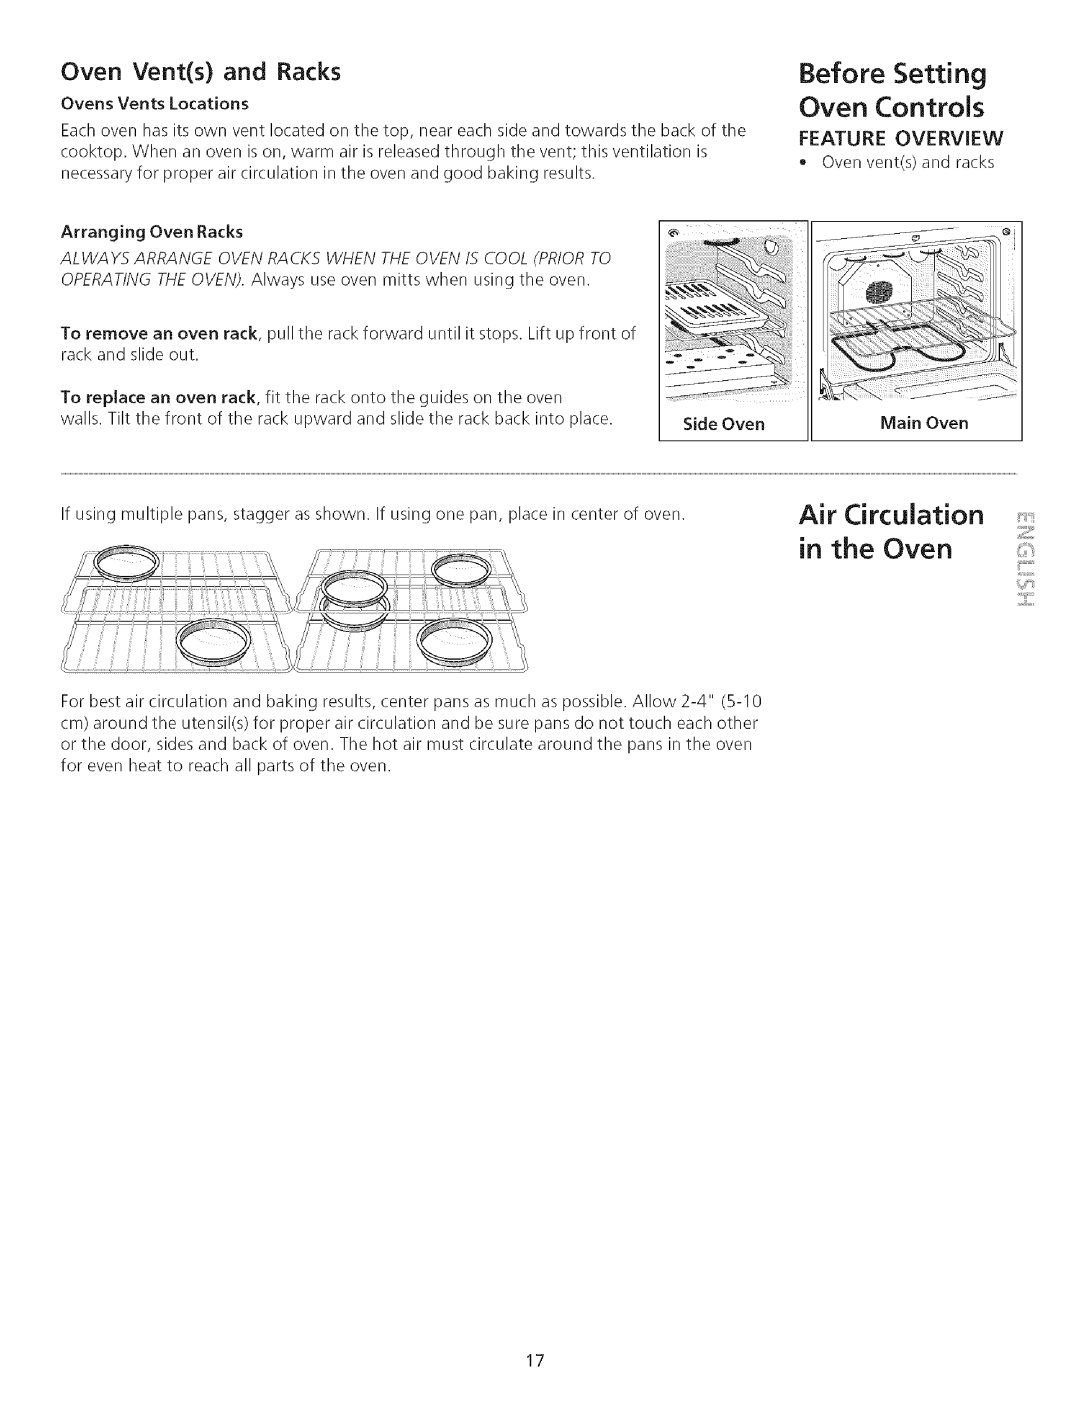 Kenmore 790.75503 manual Air Circulation, in the Oven, Before Setting Oven Controls, Feature Overview 